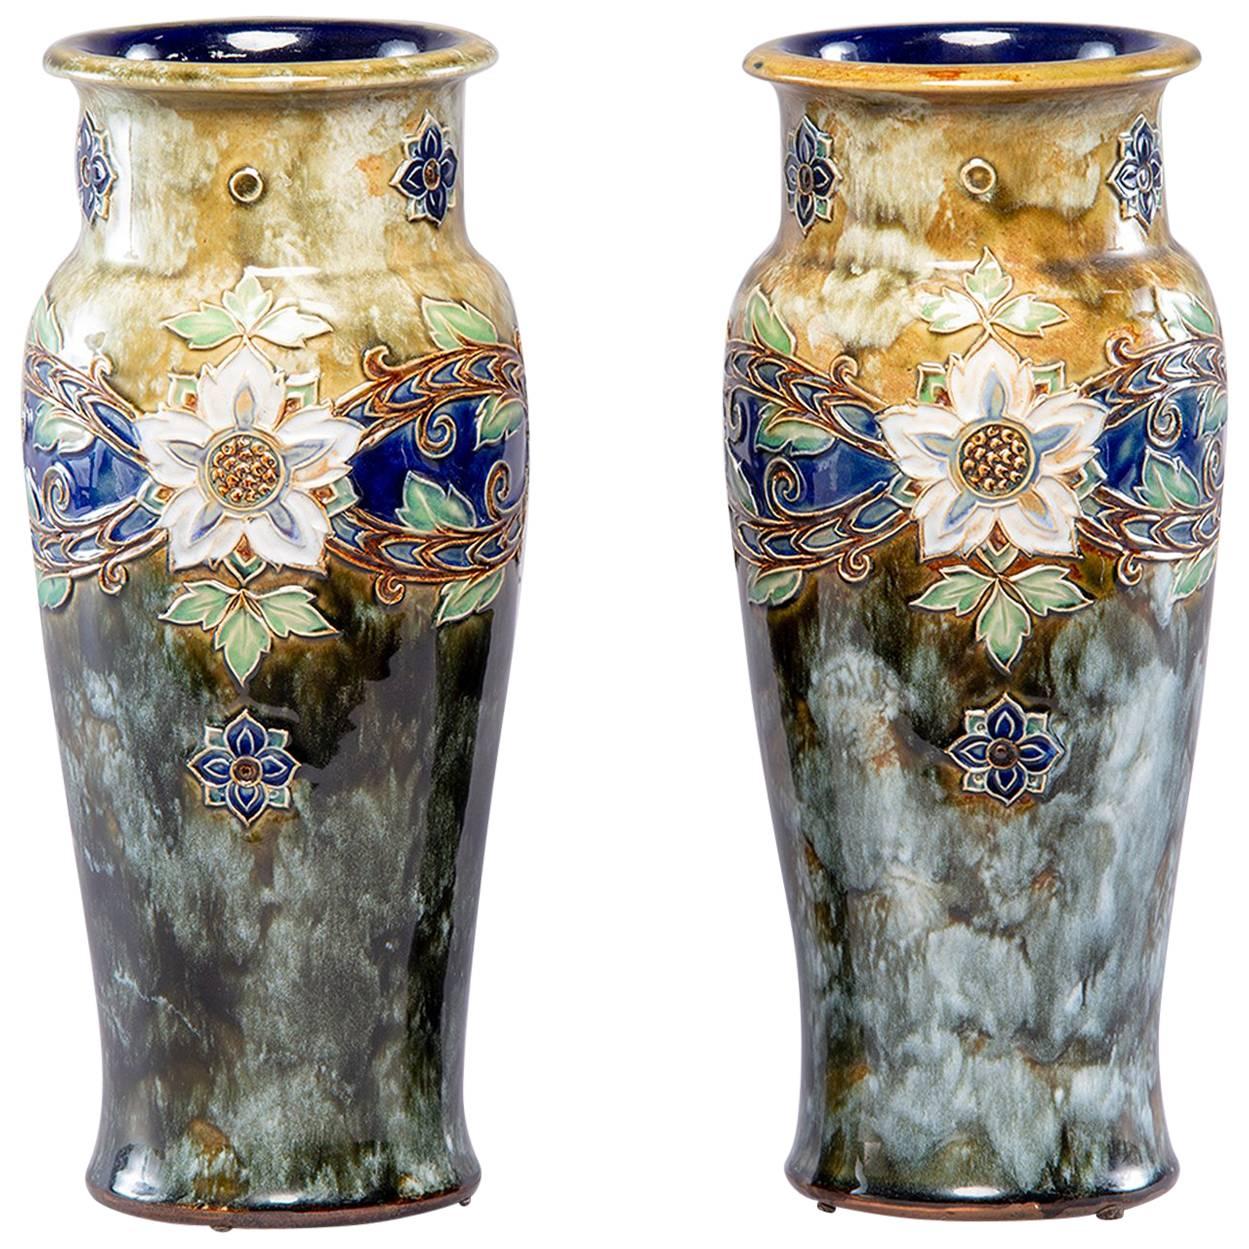 Pair of Tall Royal Doulton Art Nouveau Lambeth Vases by Winnie Bowstead